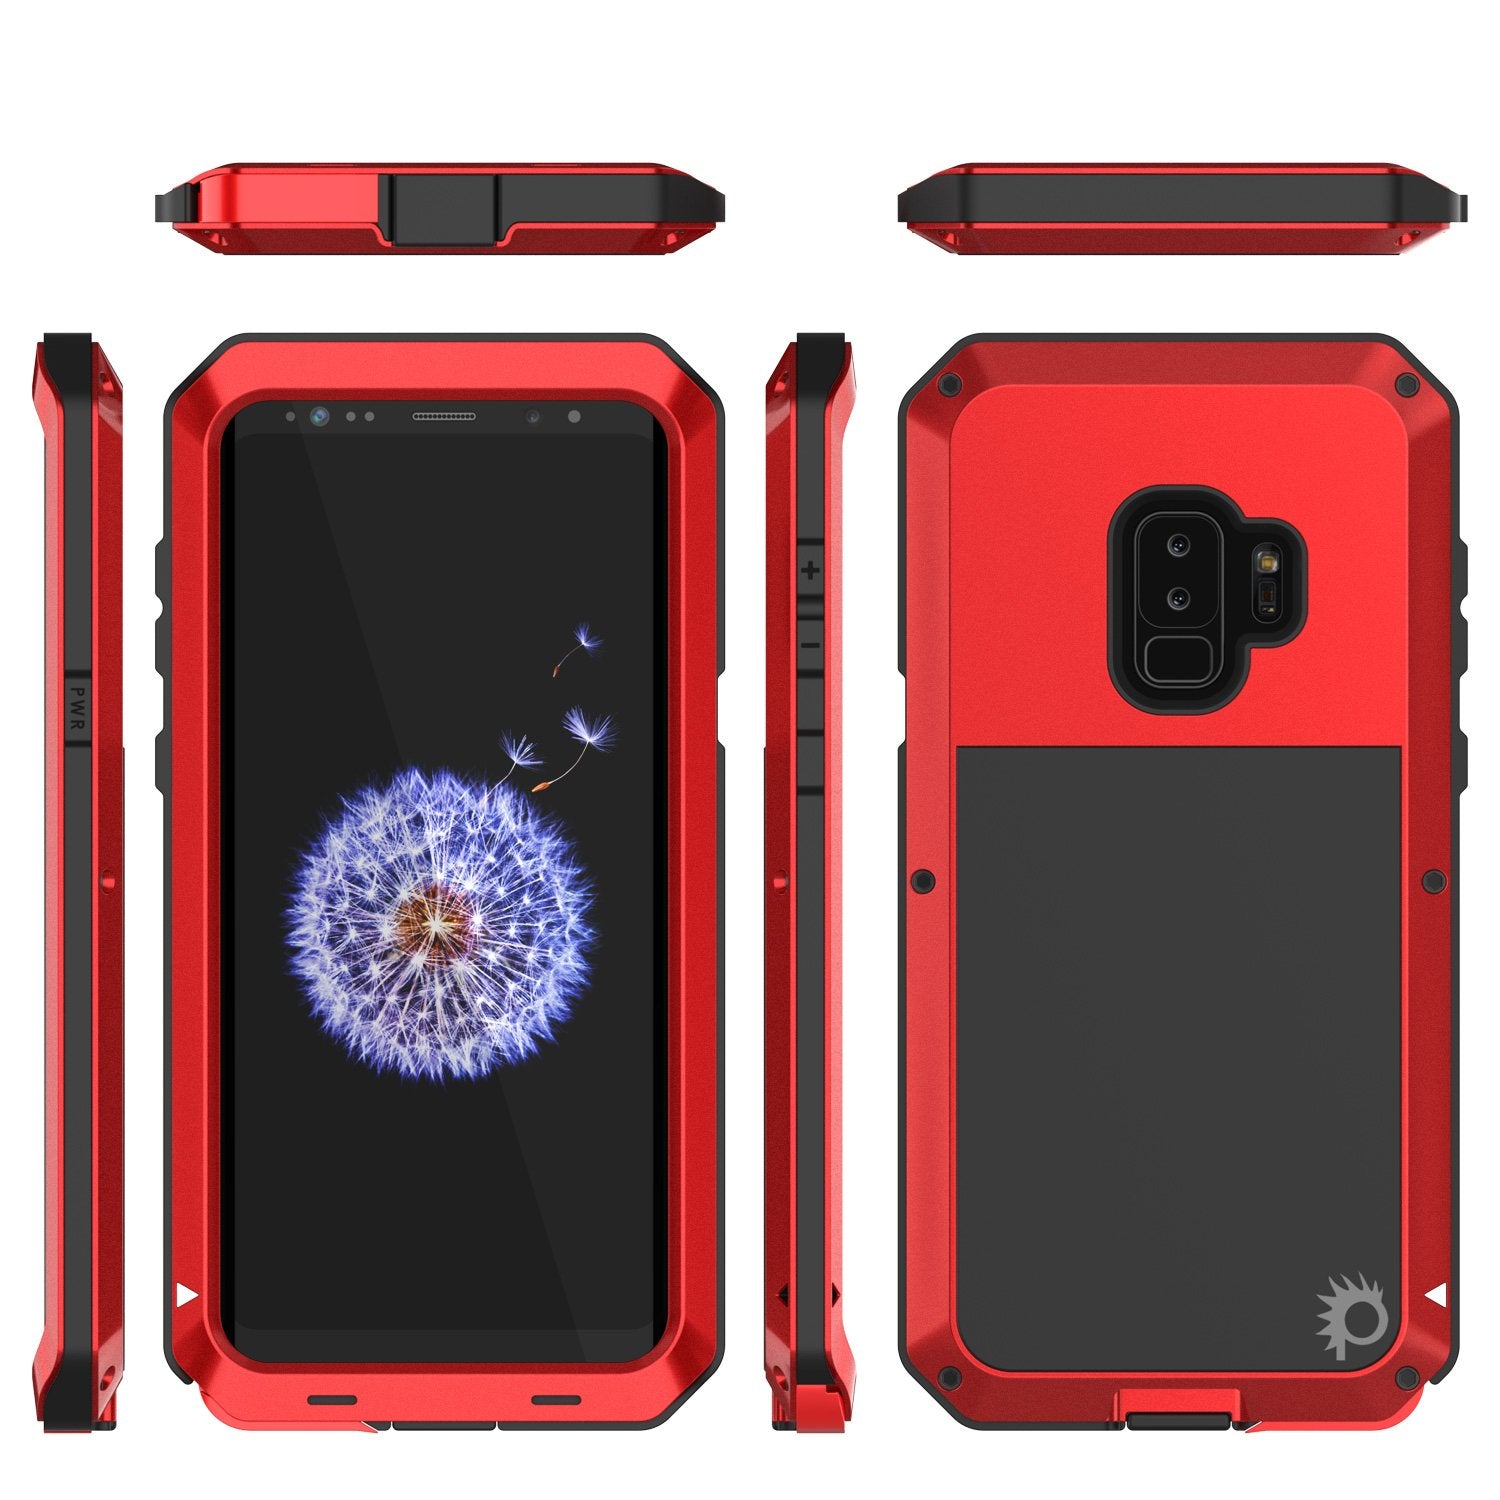 Galaxy S9 Plus Metal Case, Heavy Duty Military Grade Rugged Armor Cover [shock proof] Hybrid Full Body Hard Aluminum & TPU Design [non slip] W/ Prime Drop Protection for Samsung Galaxy S9 Plus [Red]